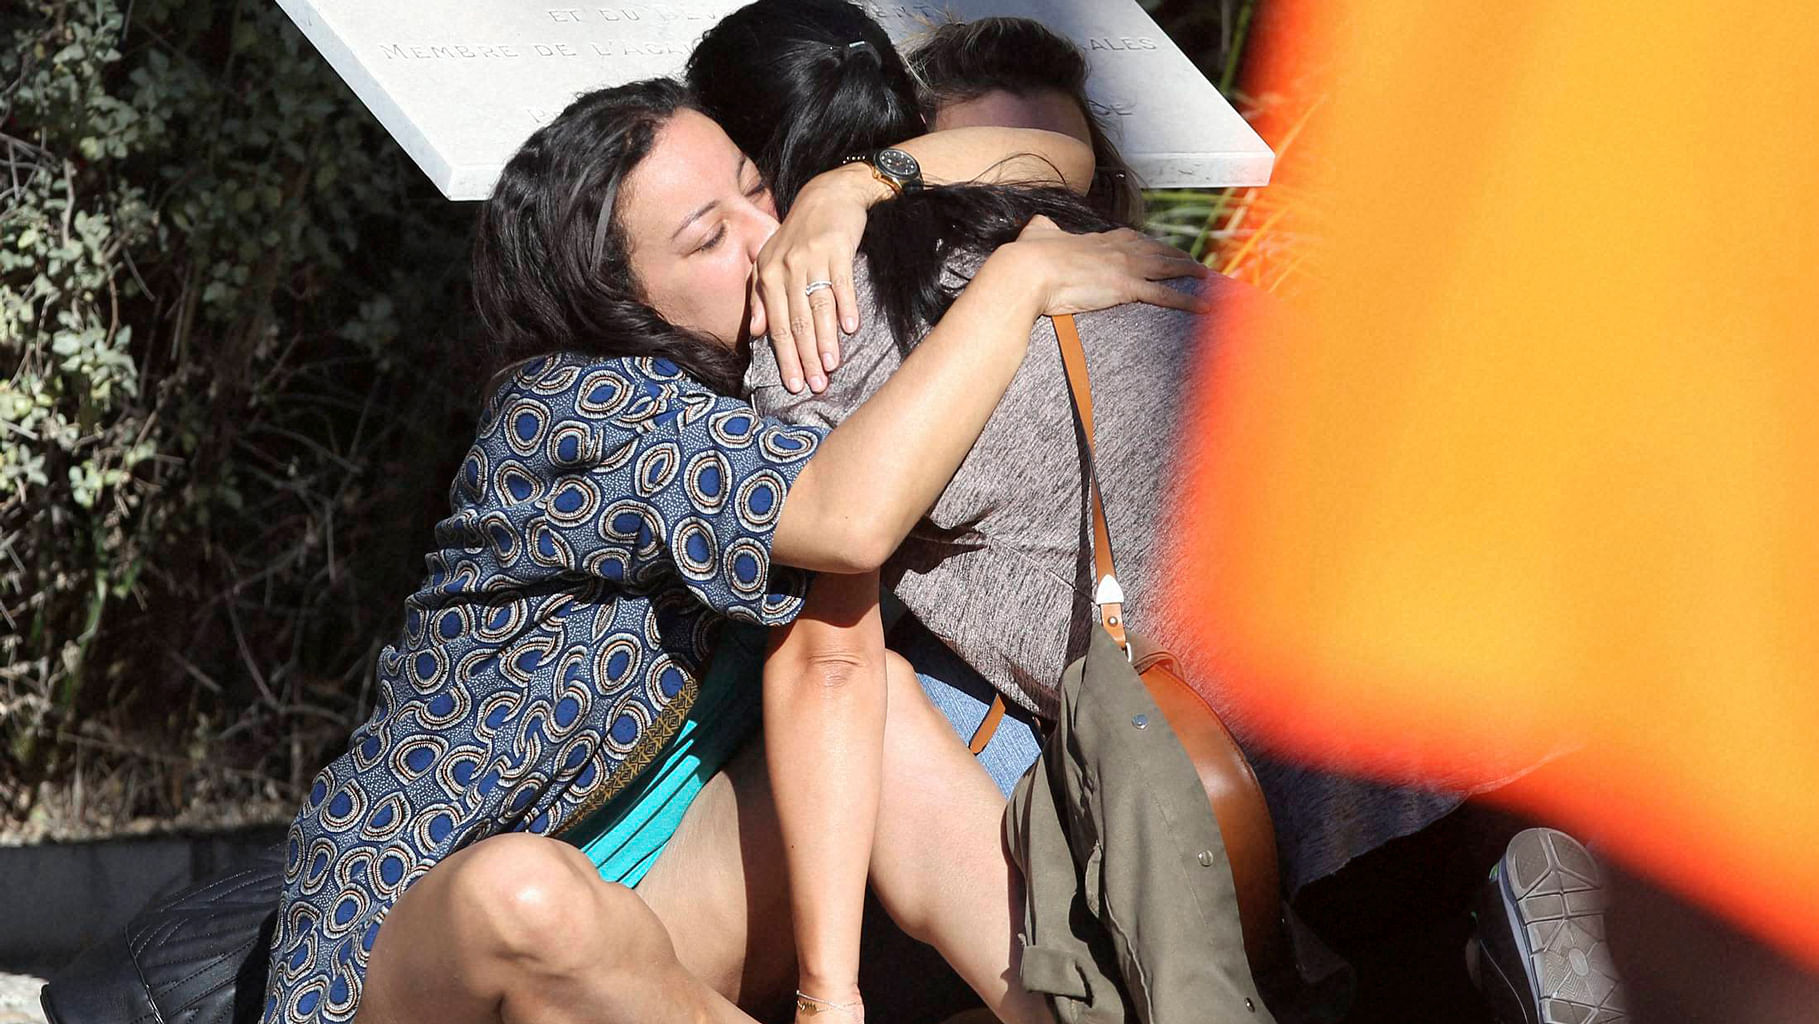 Parents of victims embrace each other near the scene of a truck attack  in Nice, southern France, Friday, July 15, 2016. (Photo Courtesy: PTI)&nbsp;